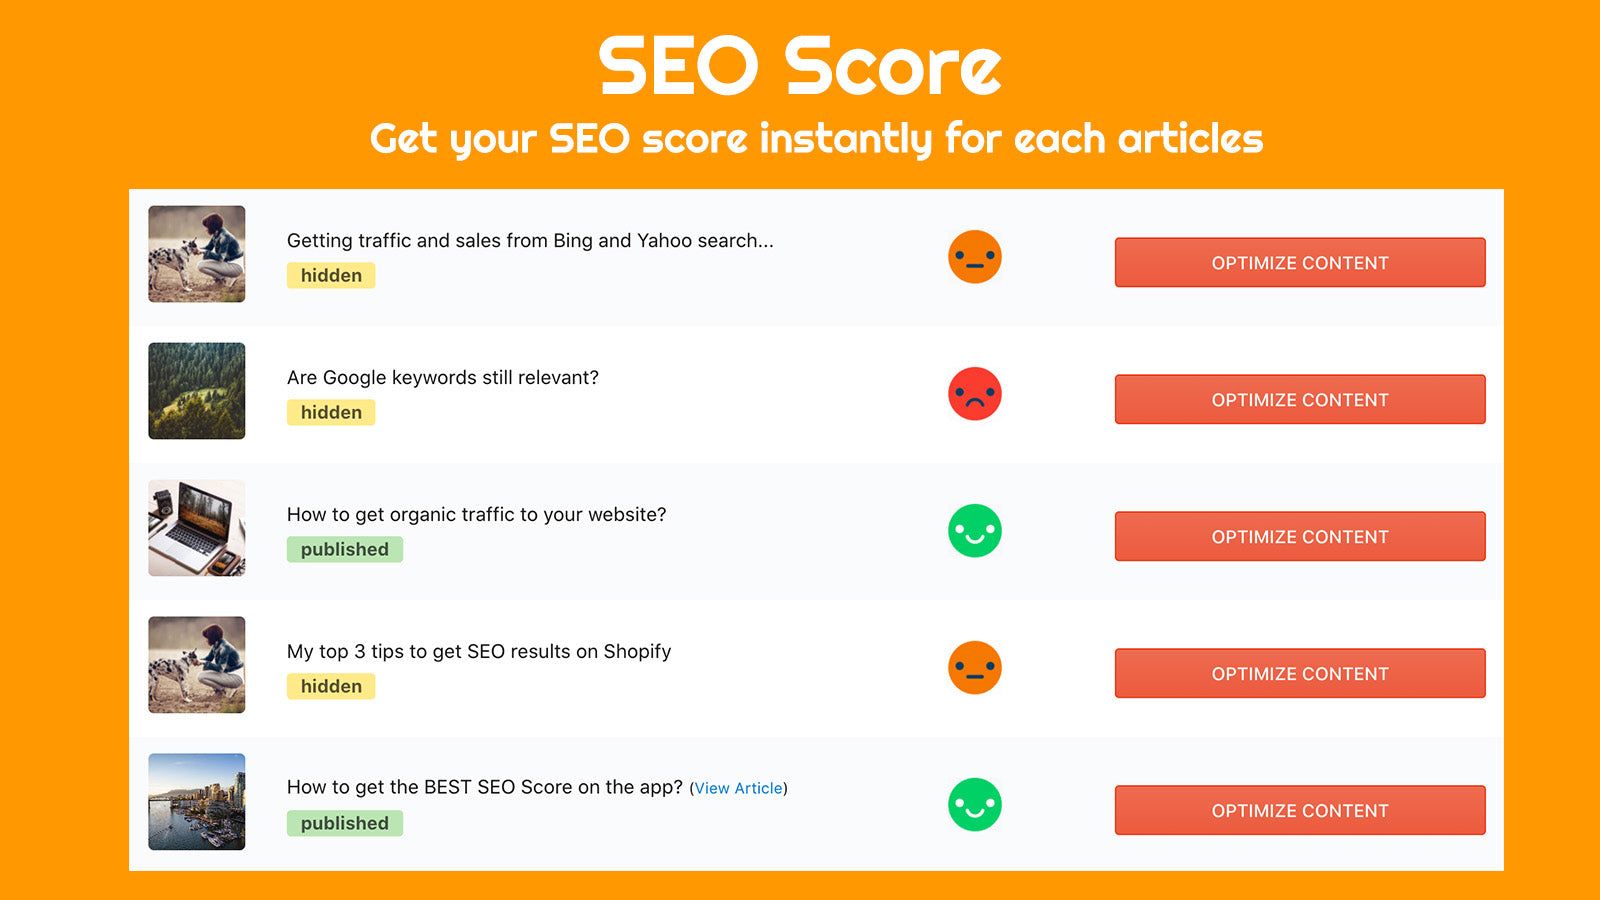 Get SEO Score instantly for your blog articles